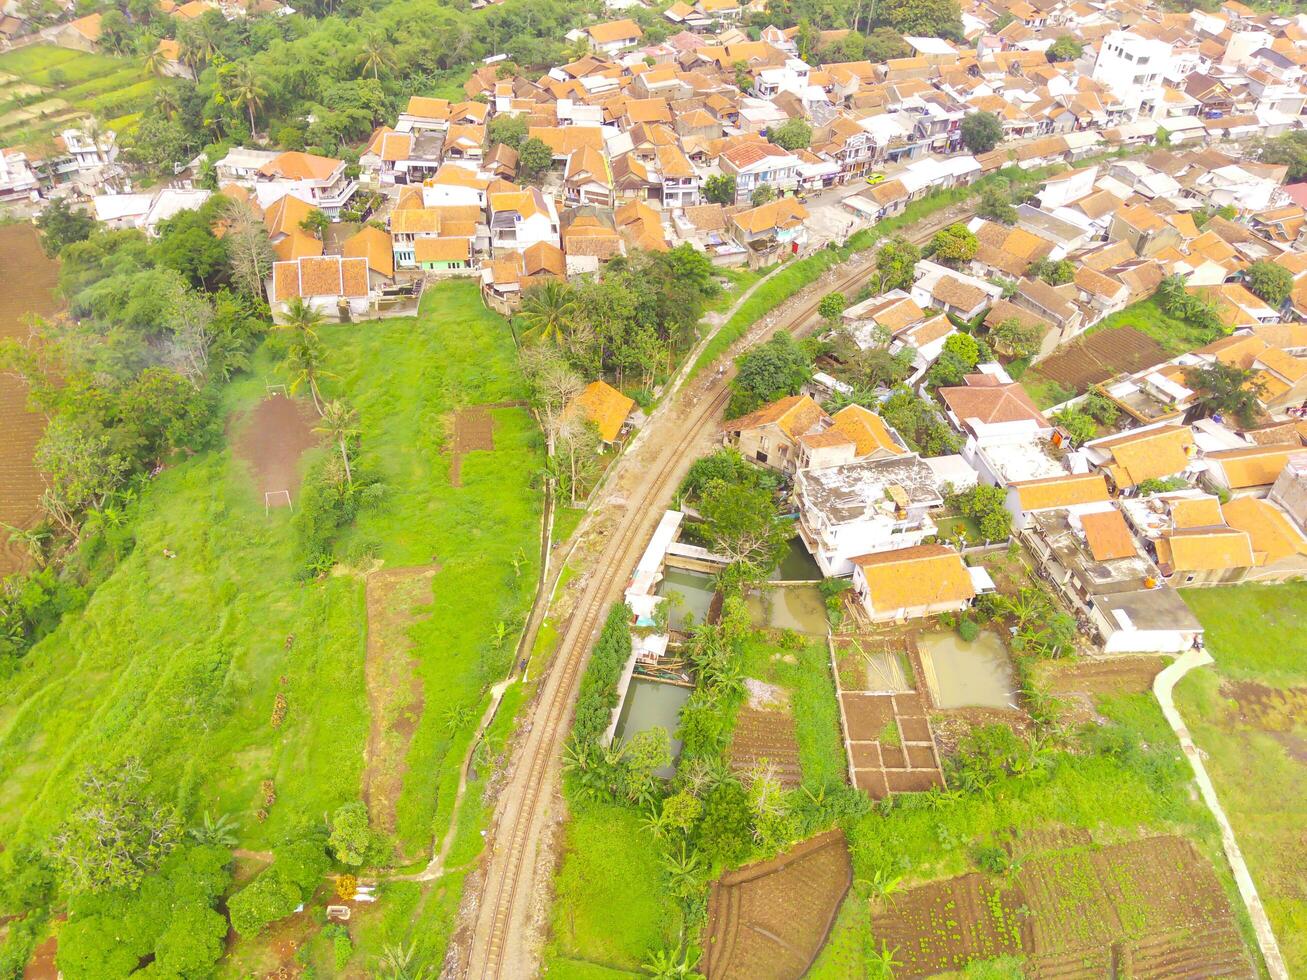 Bird's eye view from drone of a railroad track between residential areas and rice fields in Cicalengka, Indonesia. Shot from a drone flying 200 meters high photo